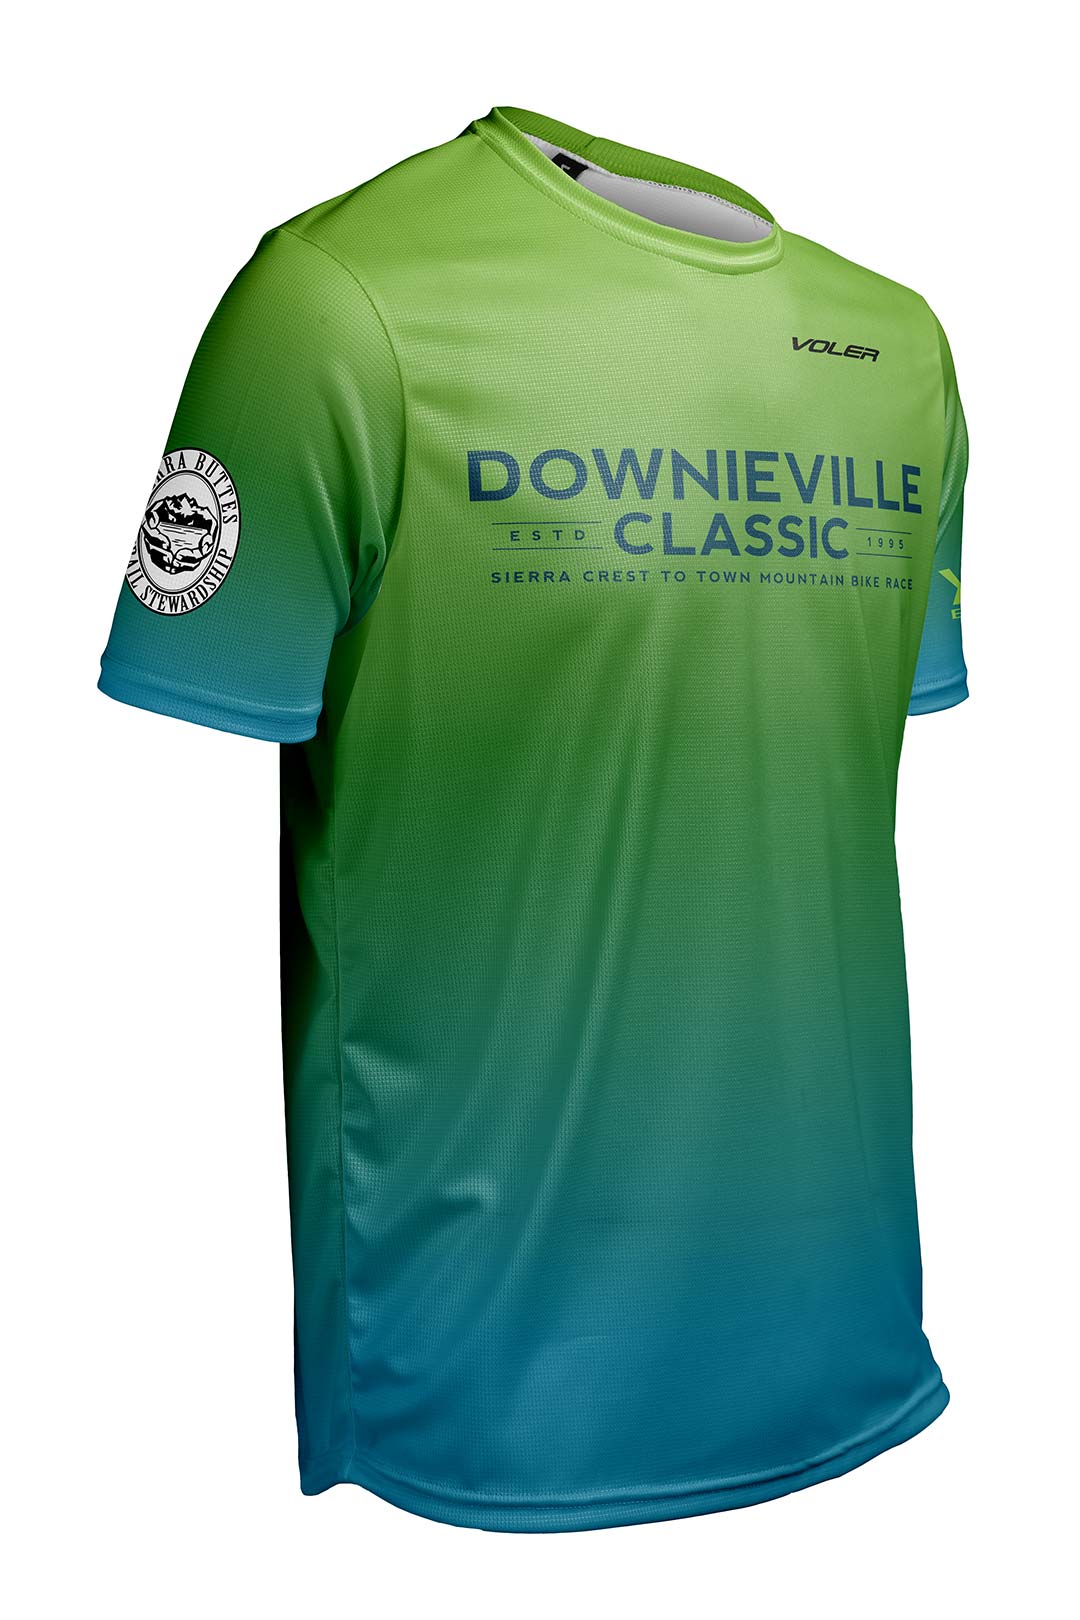 2019 Downieville Classic Jersey Front